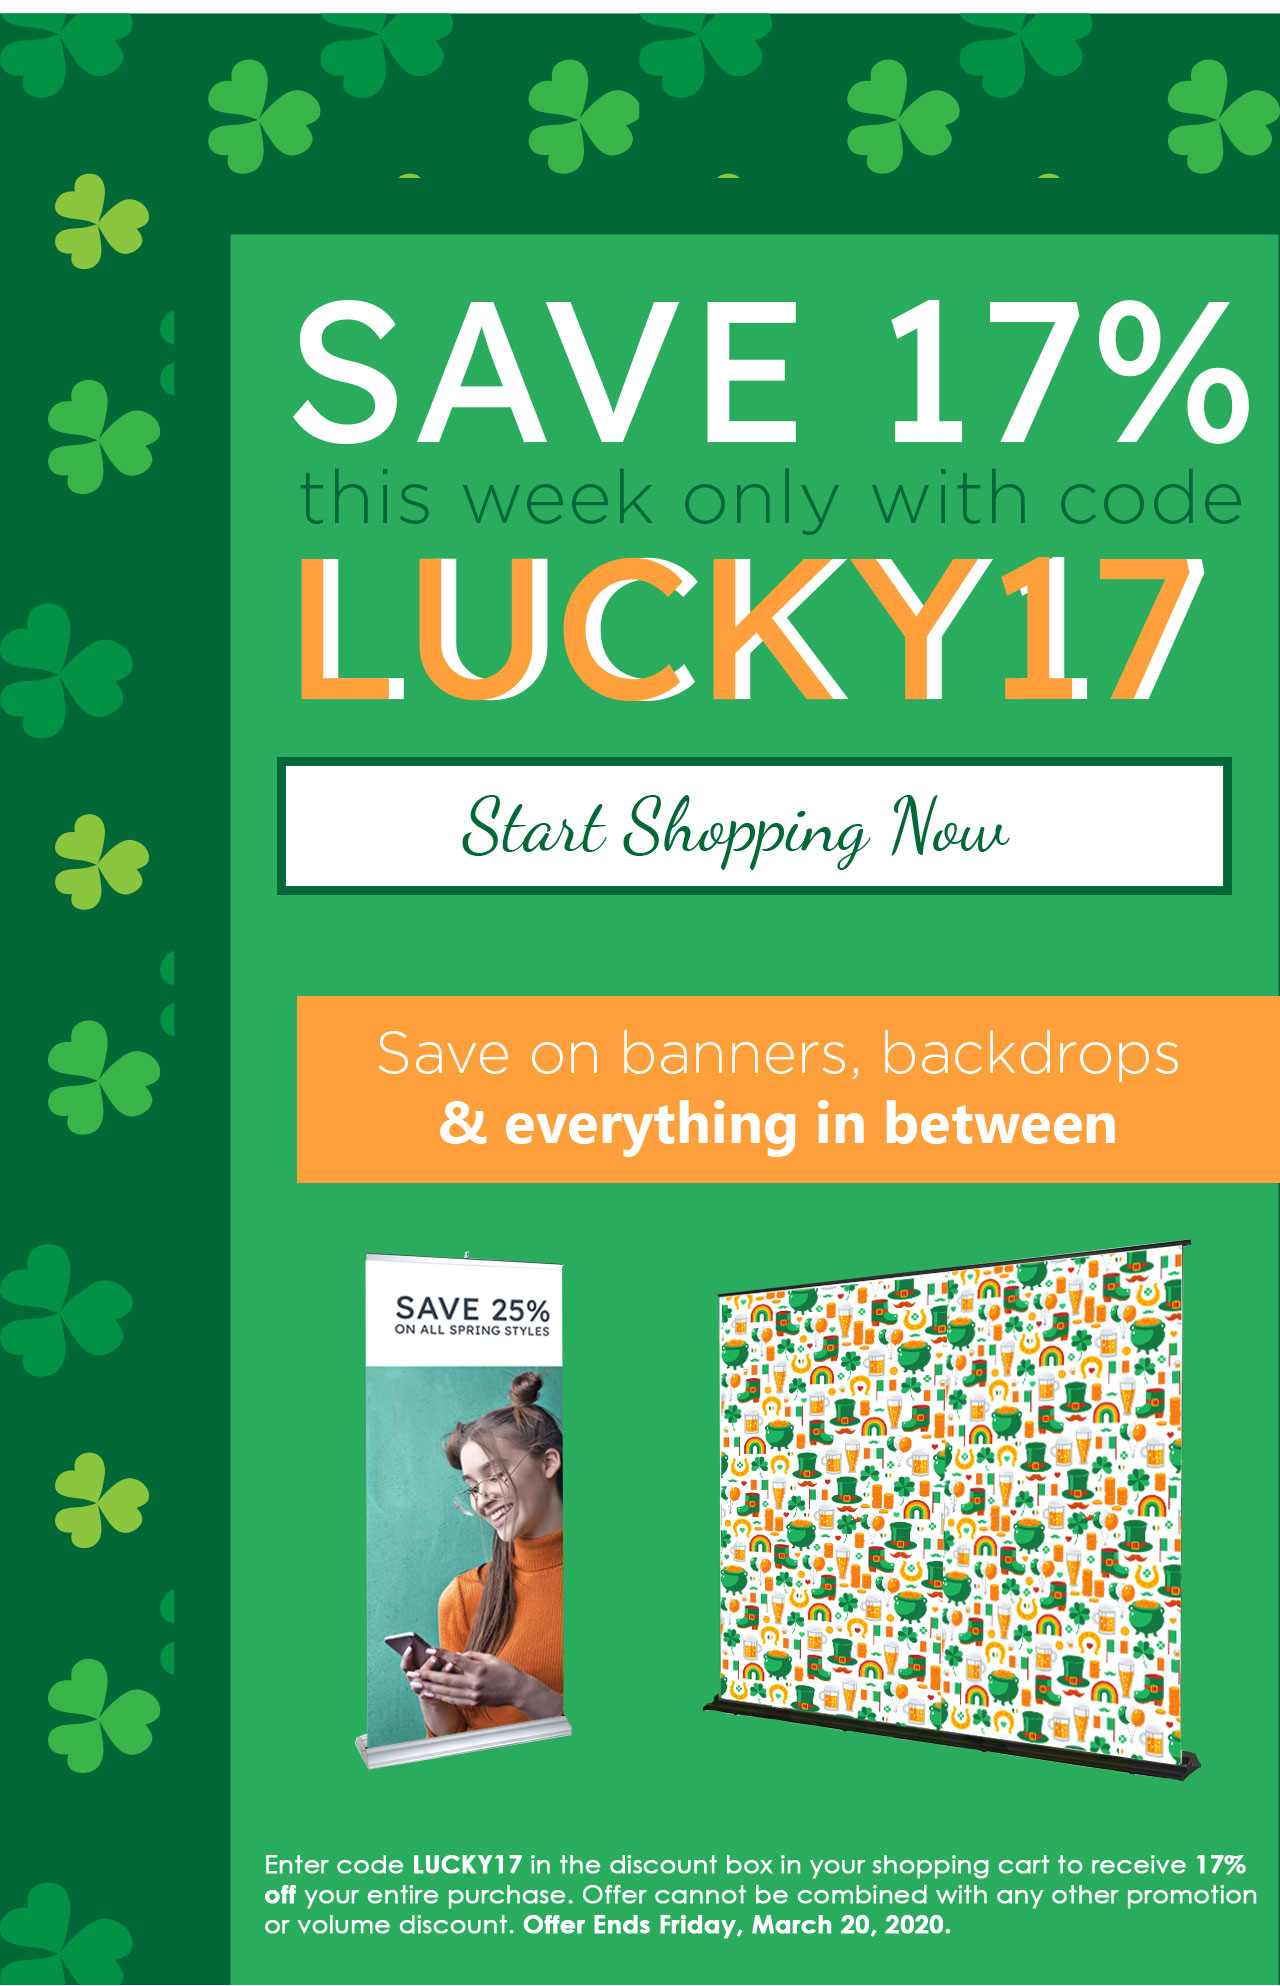 SAVE 17% this week only with code LUCKY17